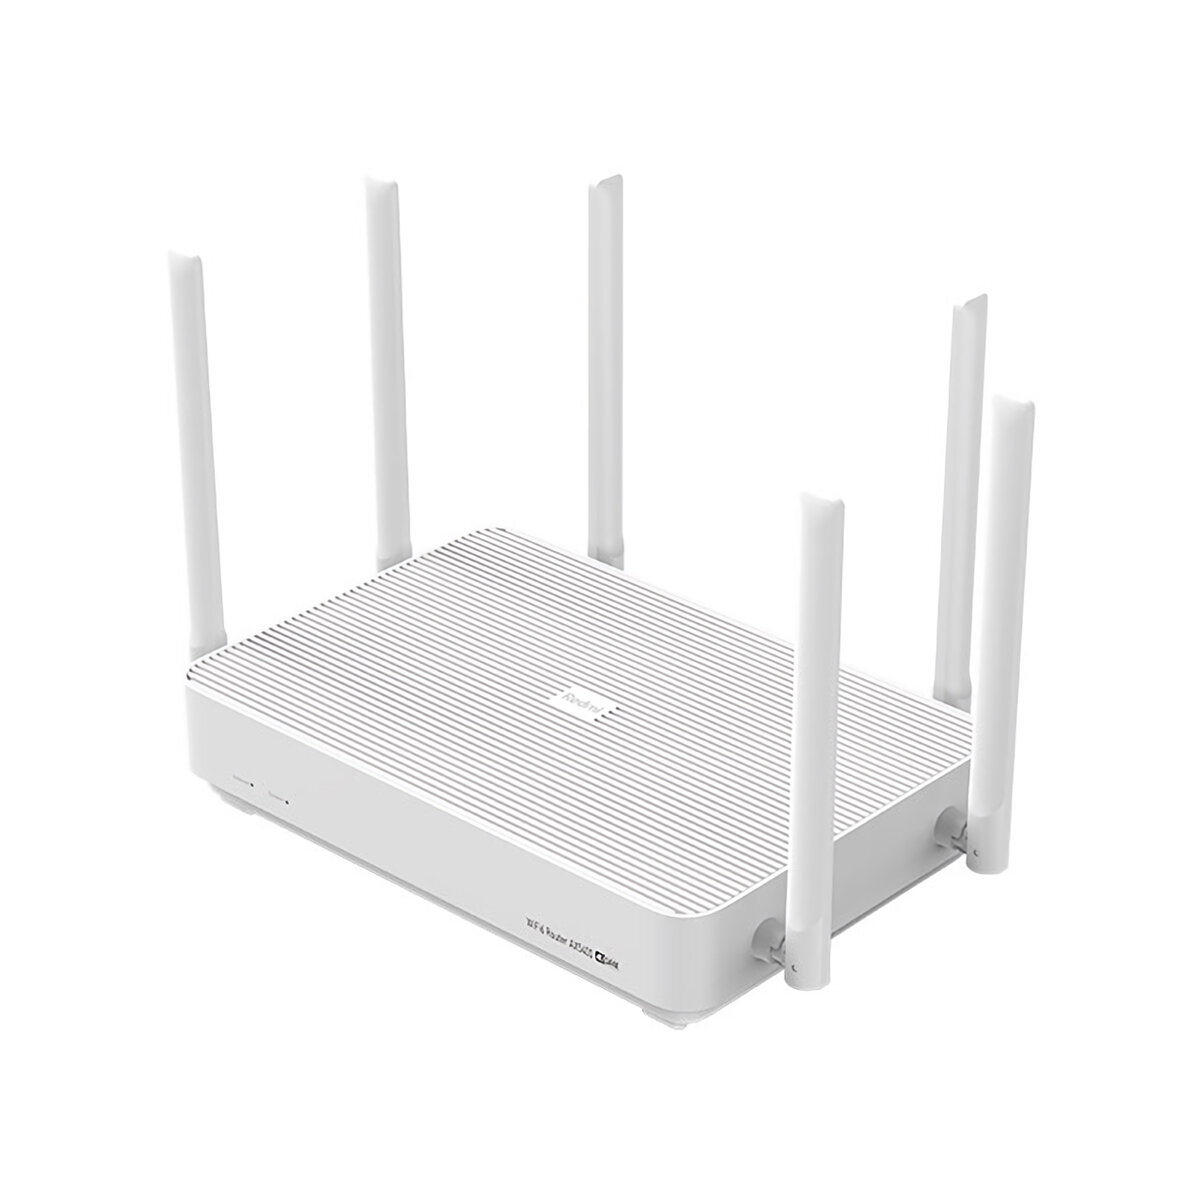 best price,xiaomi,redmi,ax5400,router,512mb,coupon,price,discount